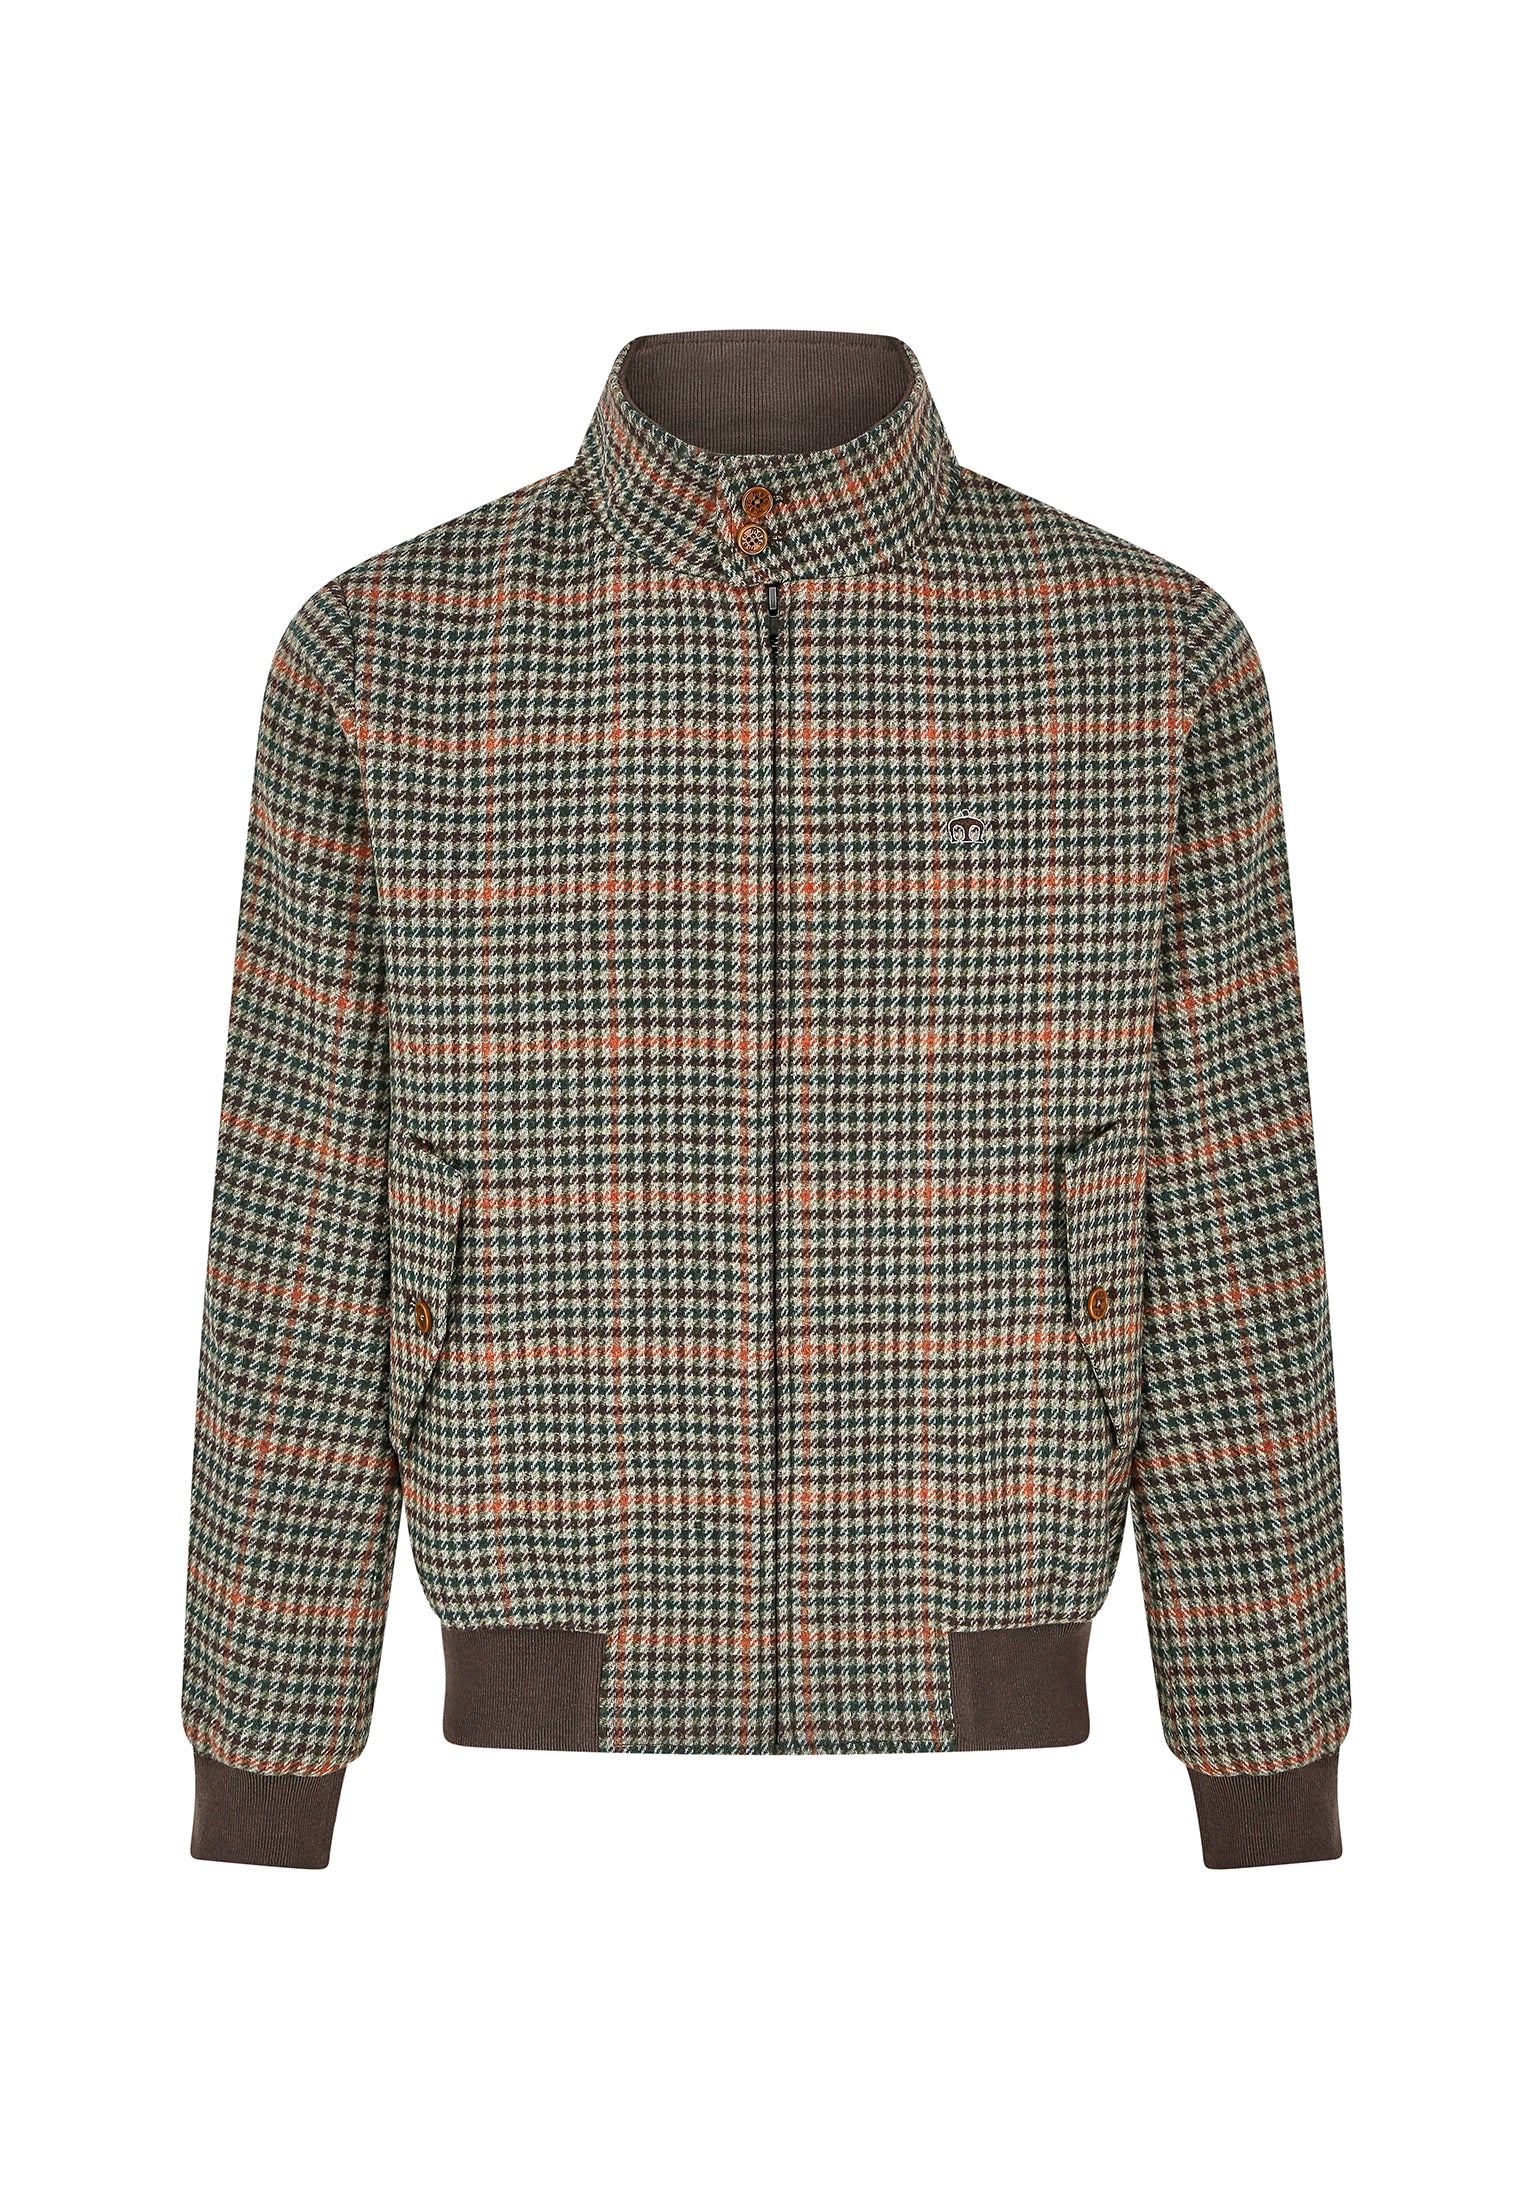 Wool Blend Dogtooth Check Harrington Jacket Front by Merc London